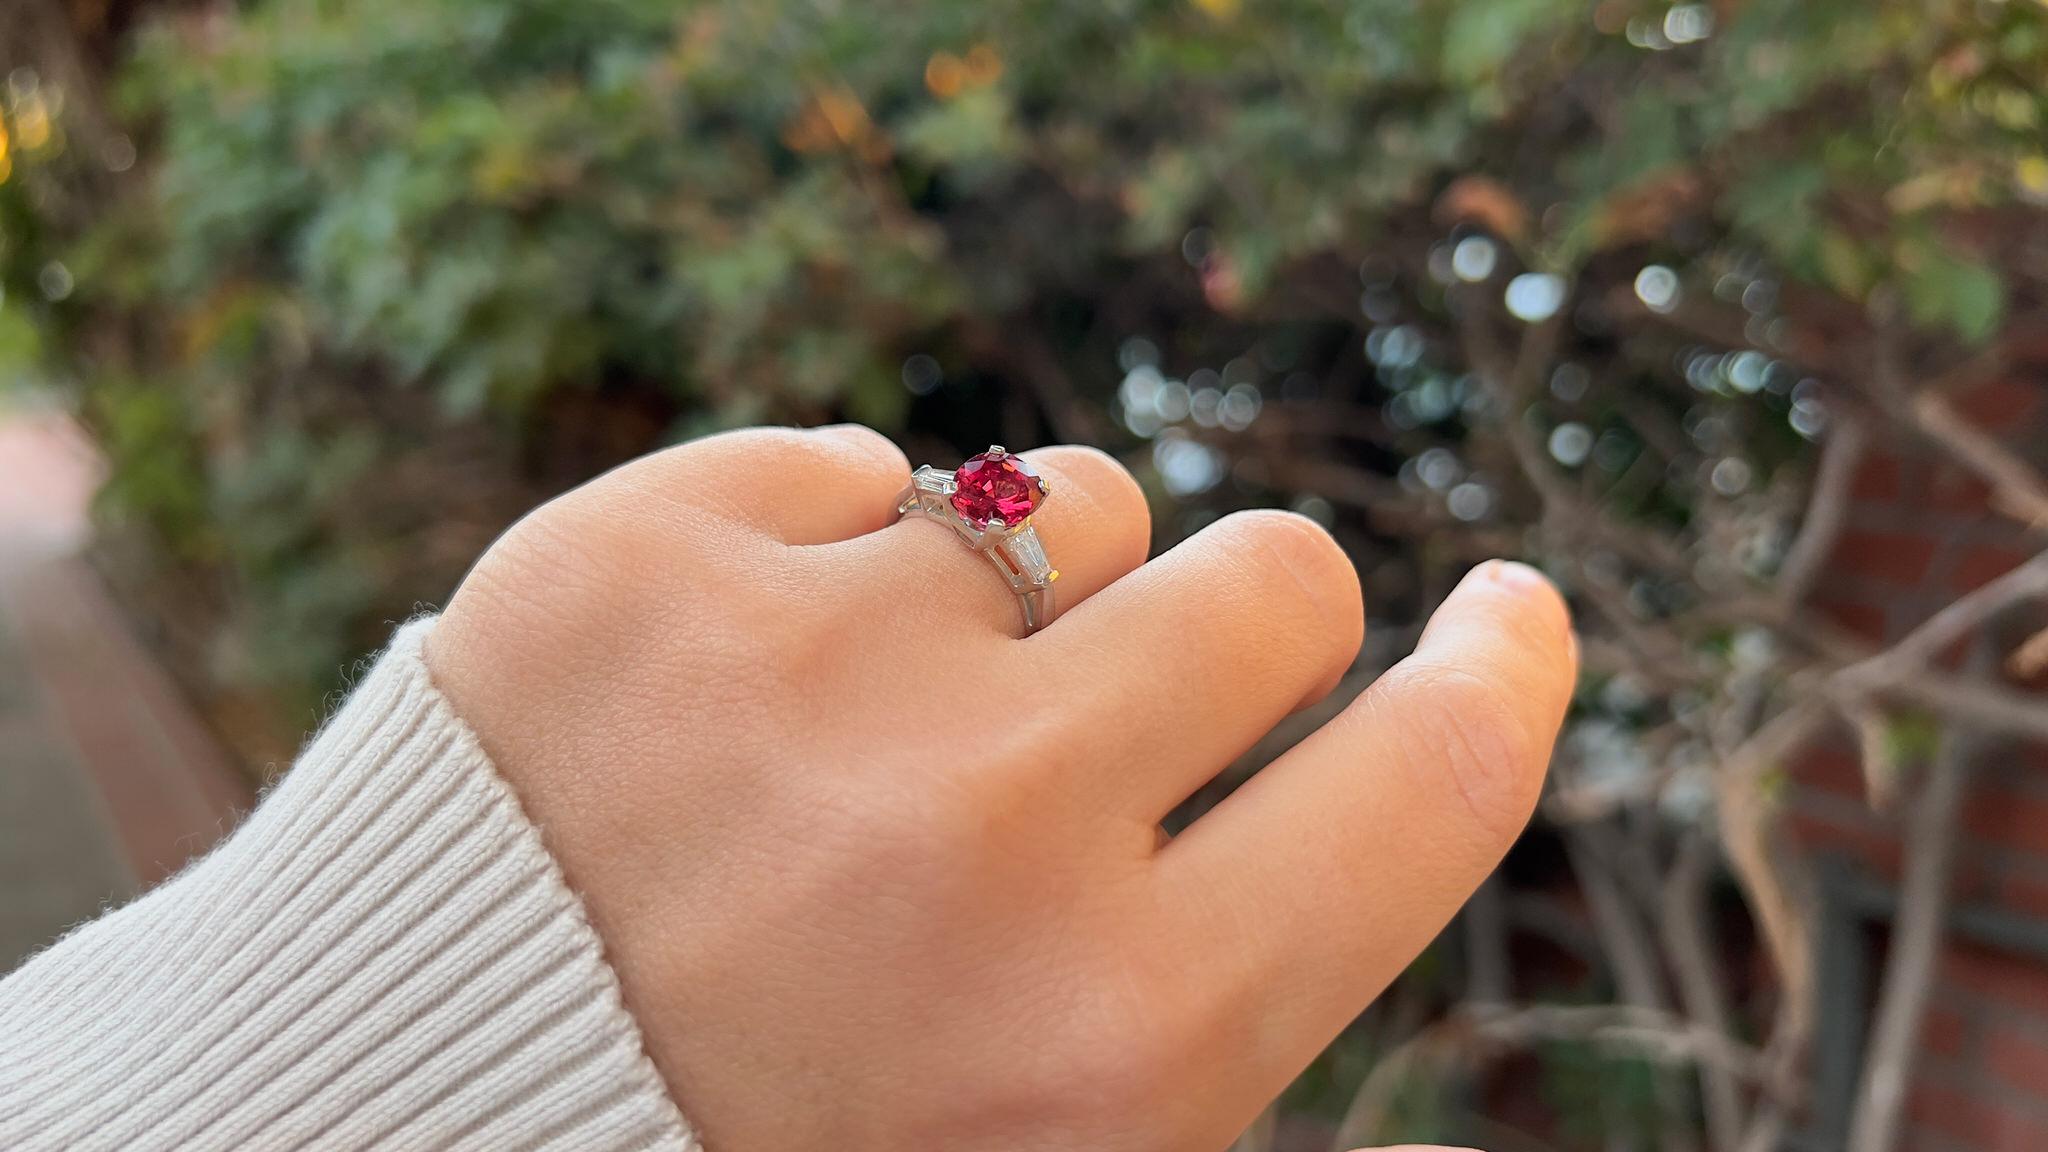 Hot Pink Spinel Ring With Diamonds 3.08 Carats Platinum In Excellent Condition For Sale In Carlsbad, CA